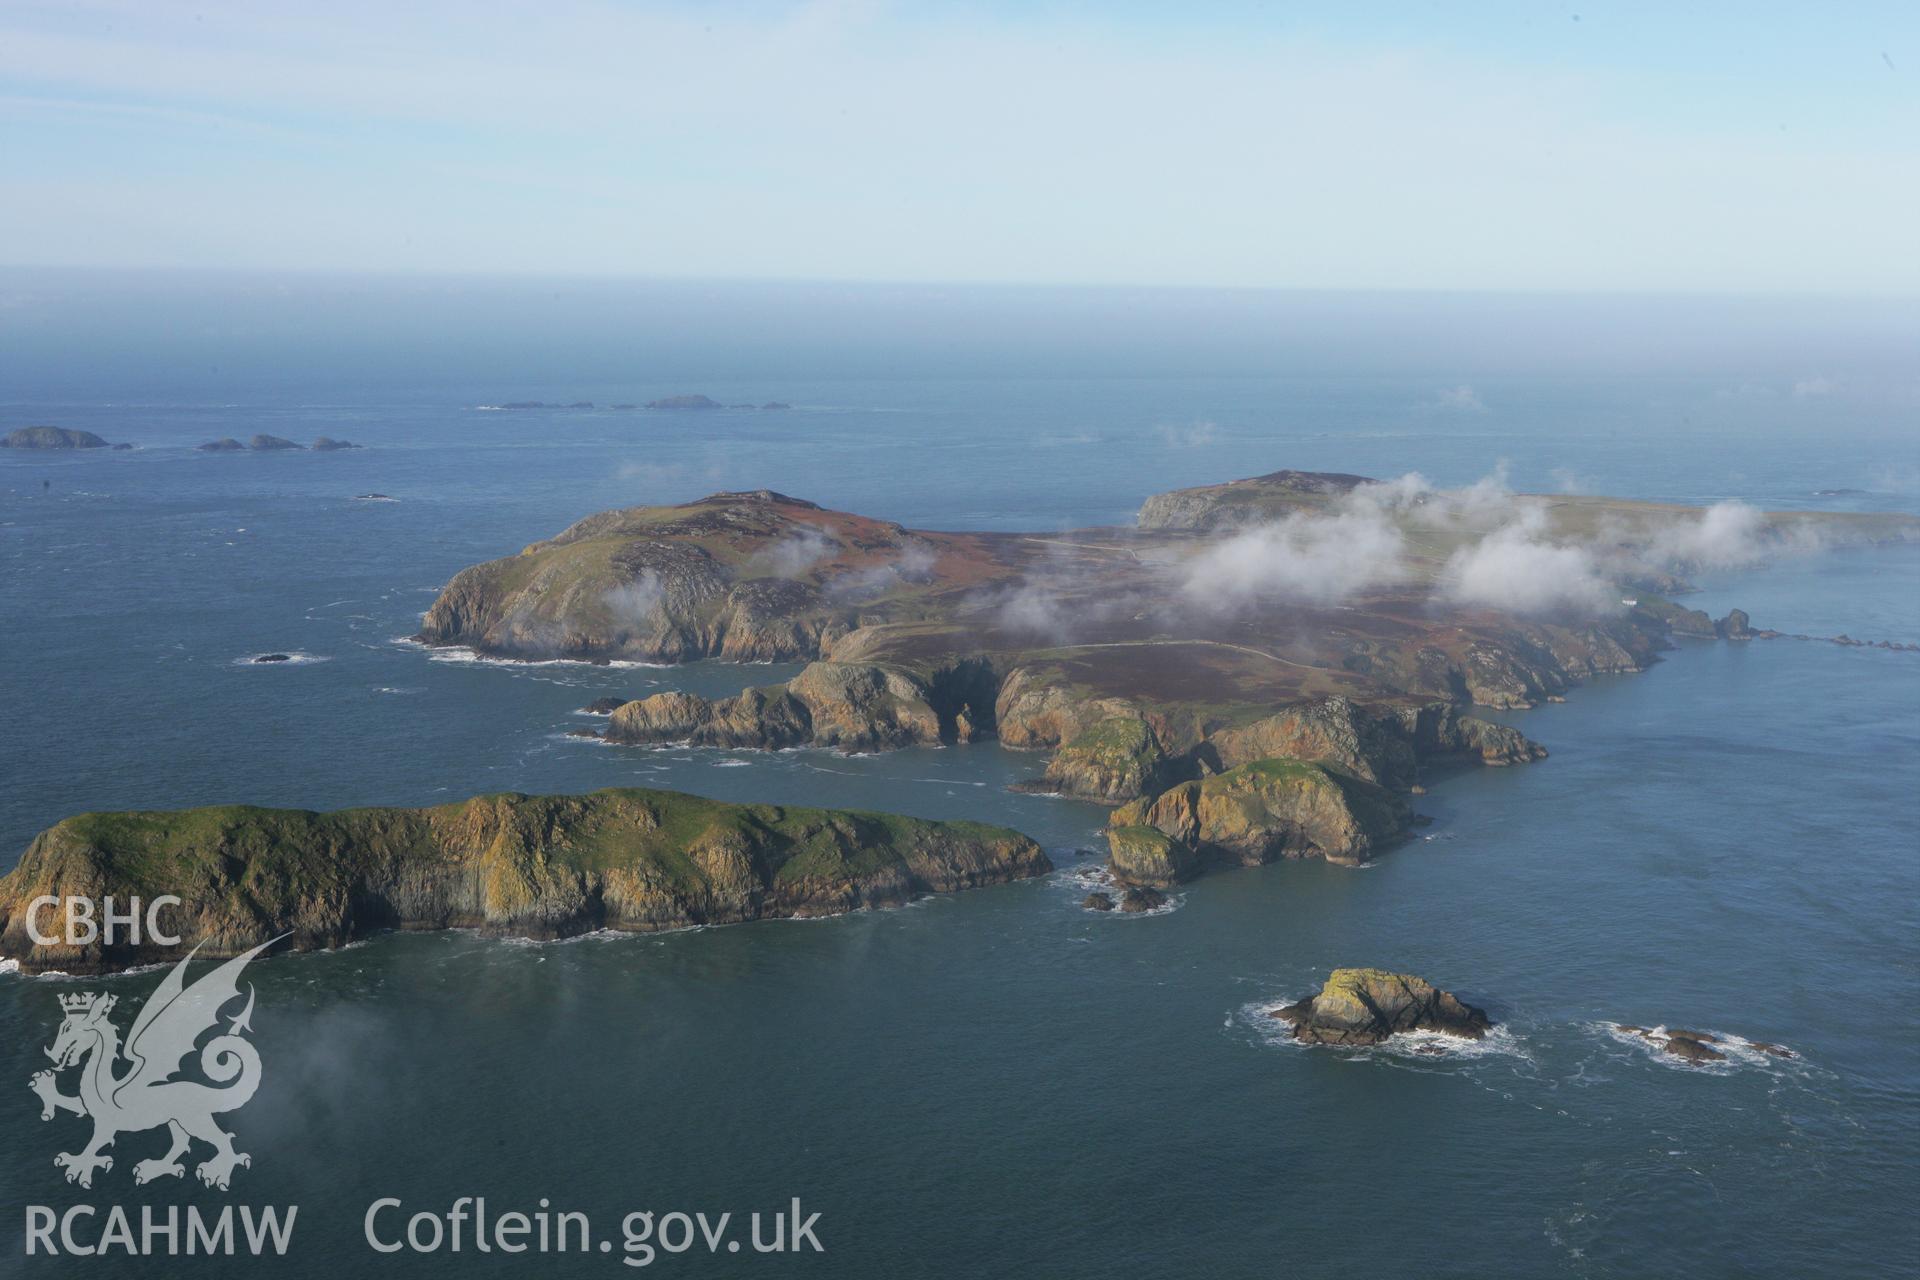 RCAHMW colour oblique aerial photograph of Ramsey Island. Taken on 28 January 2009 by Toby Driver